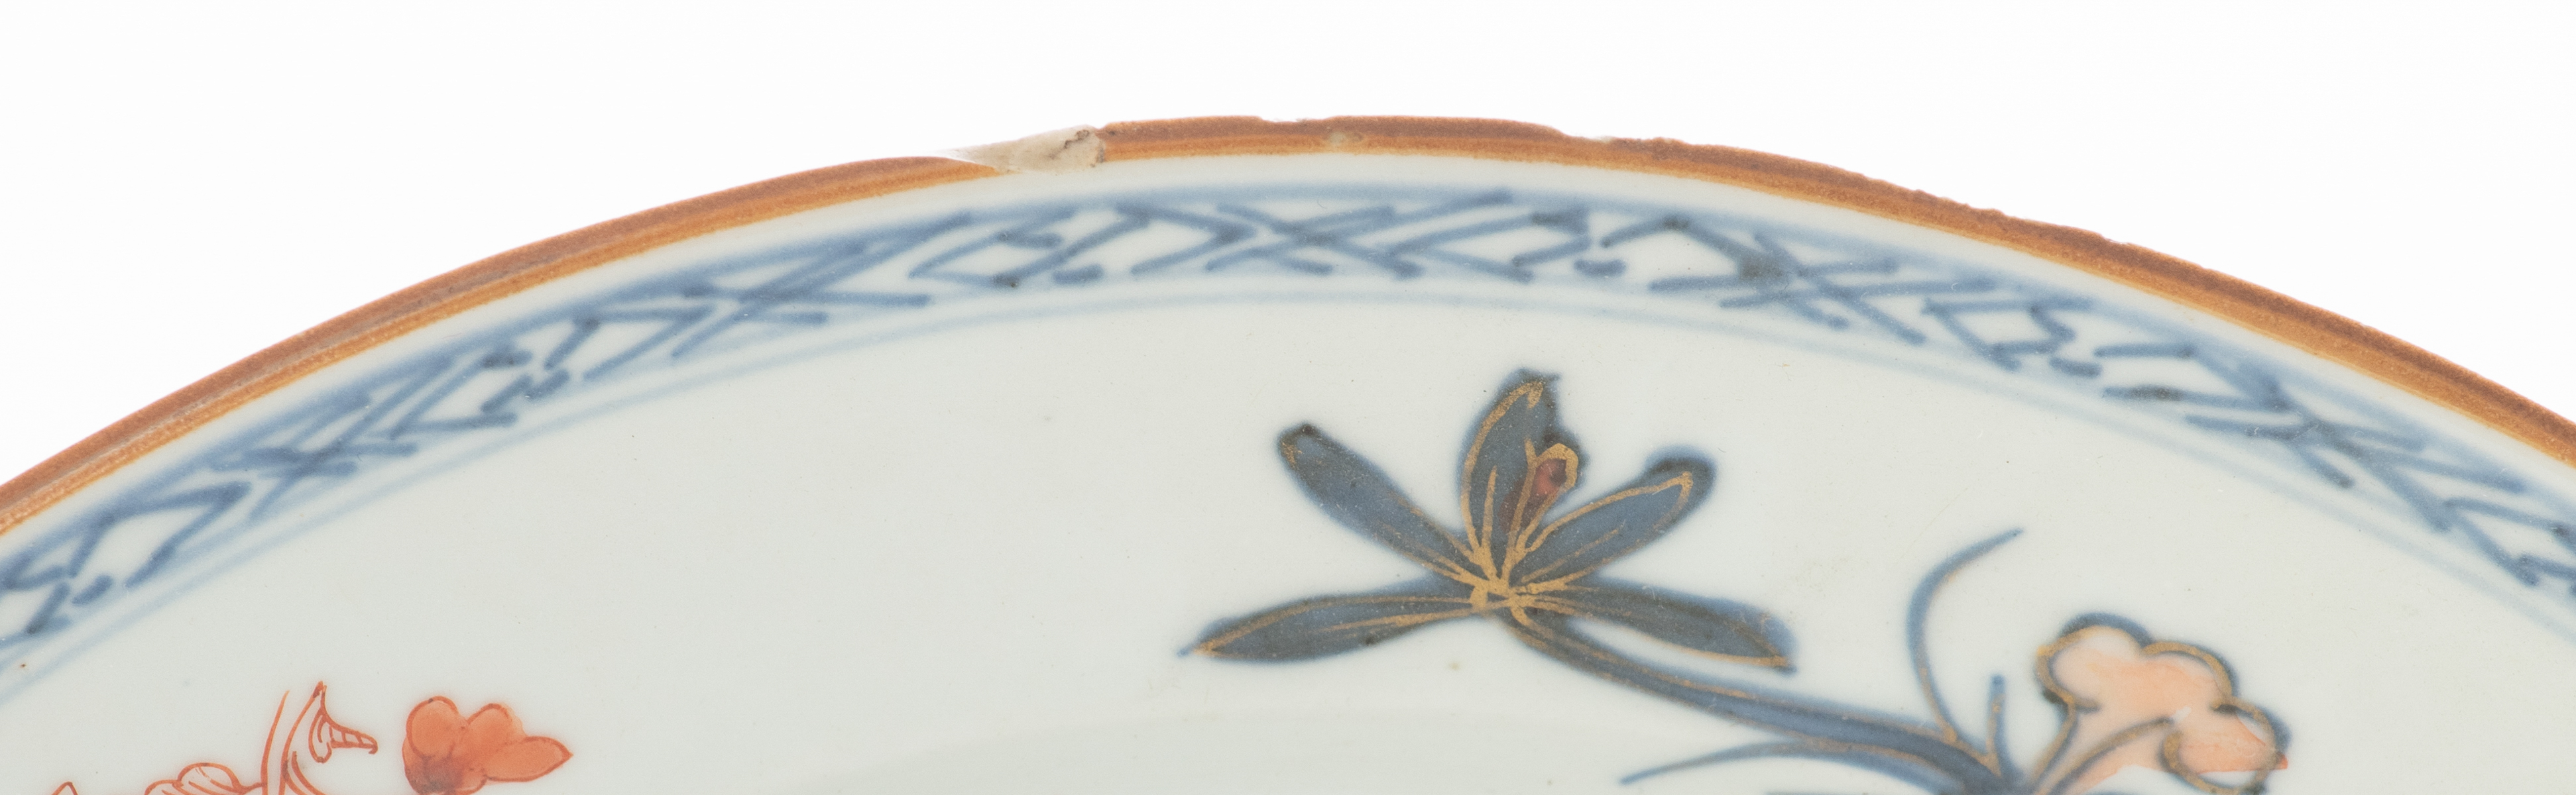 Eleven Chinese export porcelain dishes, floral decorated in Imari, famille rose, and underglaze blue - Image 9 of 11